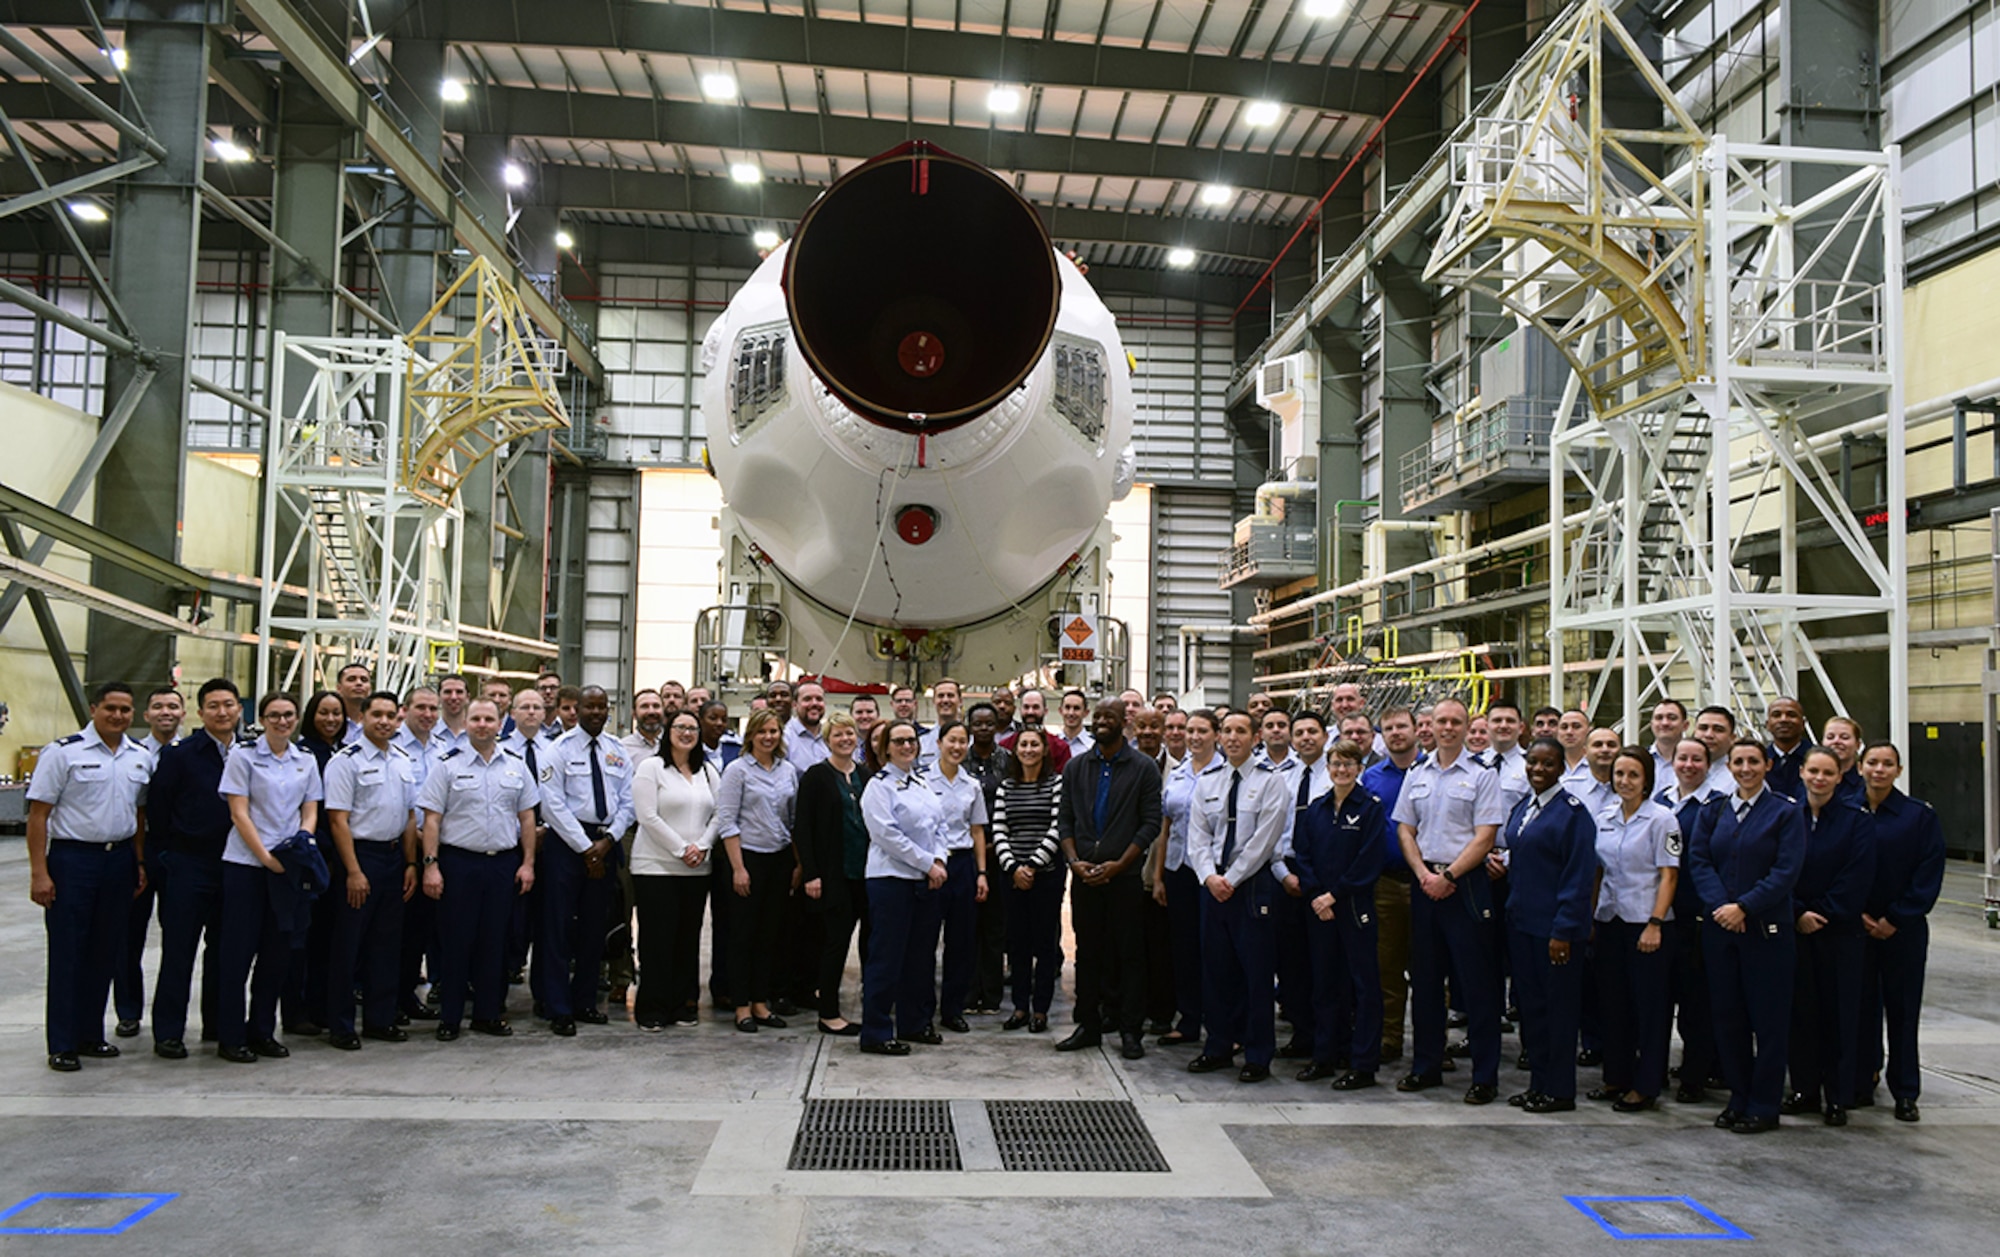 EWI Fellows posed in front of a Delta IV Medium Booster - GPS III Mission.  During the EWI Mid Tour Review, Fellows toured both the United Launch Alliance and Lockheed Martin Missiles & Fire Control facilities.  Senior leadership from both companies took the time to provide their perspective on partnering with industry and shared what’s made them successful. (U.S. Air Force Photo by Capt Frank Larkins)